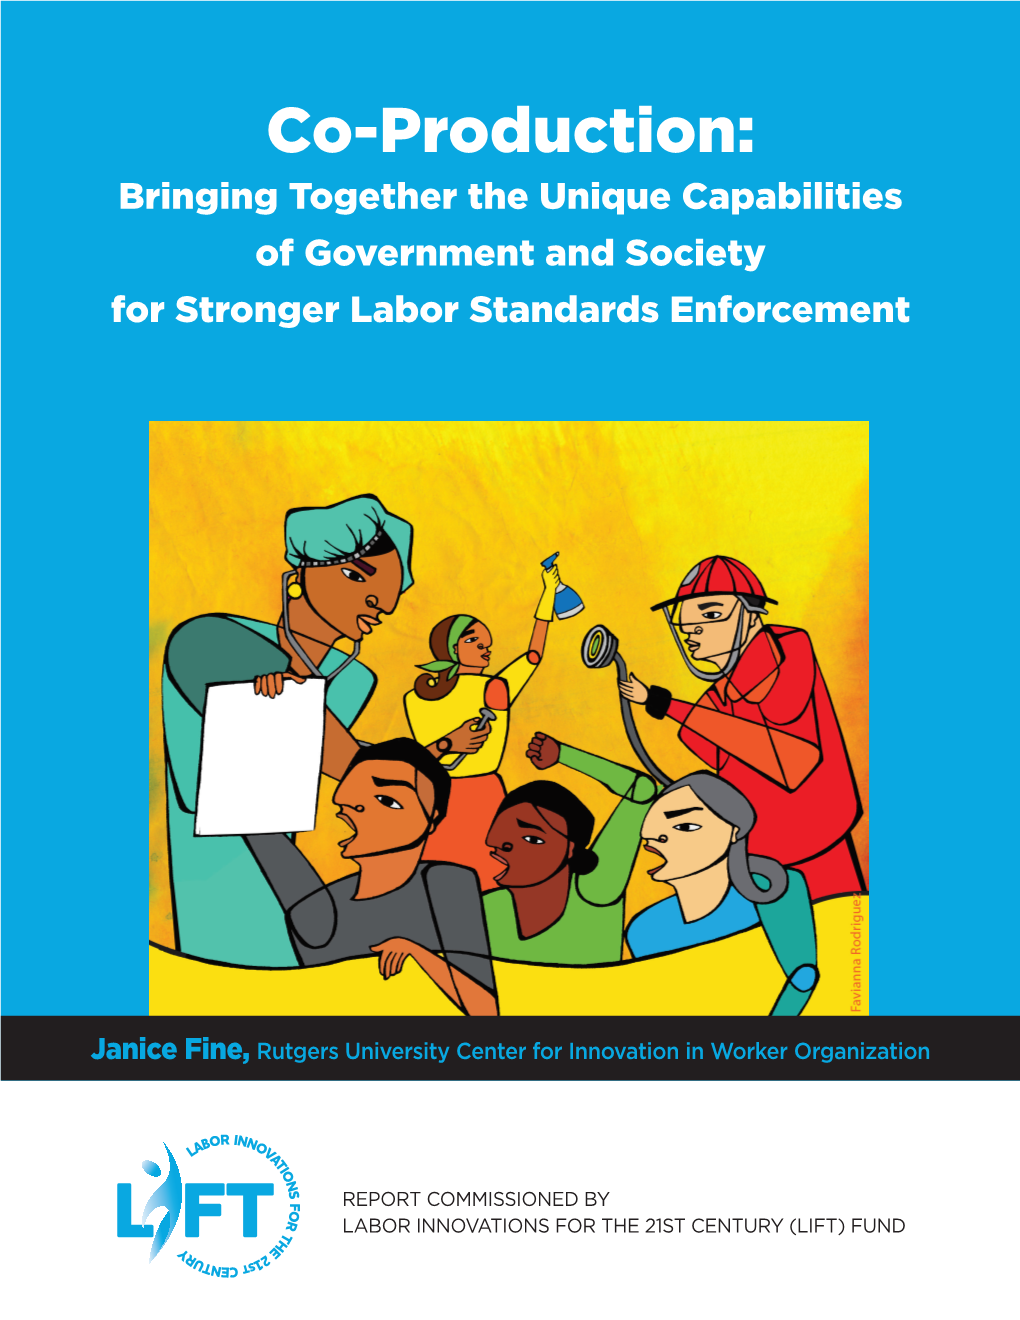 Co-Production: Bringing Together the Unique Capabilities of Government and Society for Stronger Labor Standards Enforcement